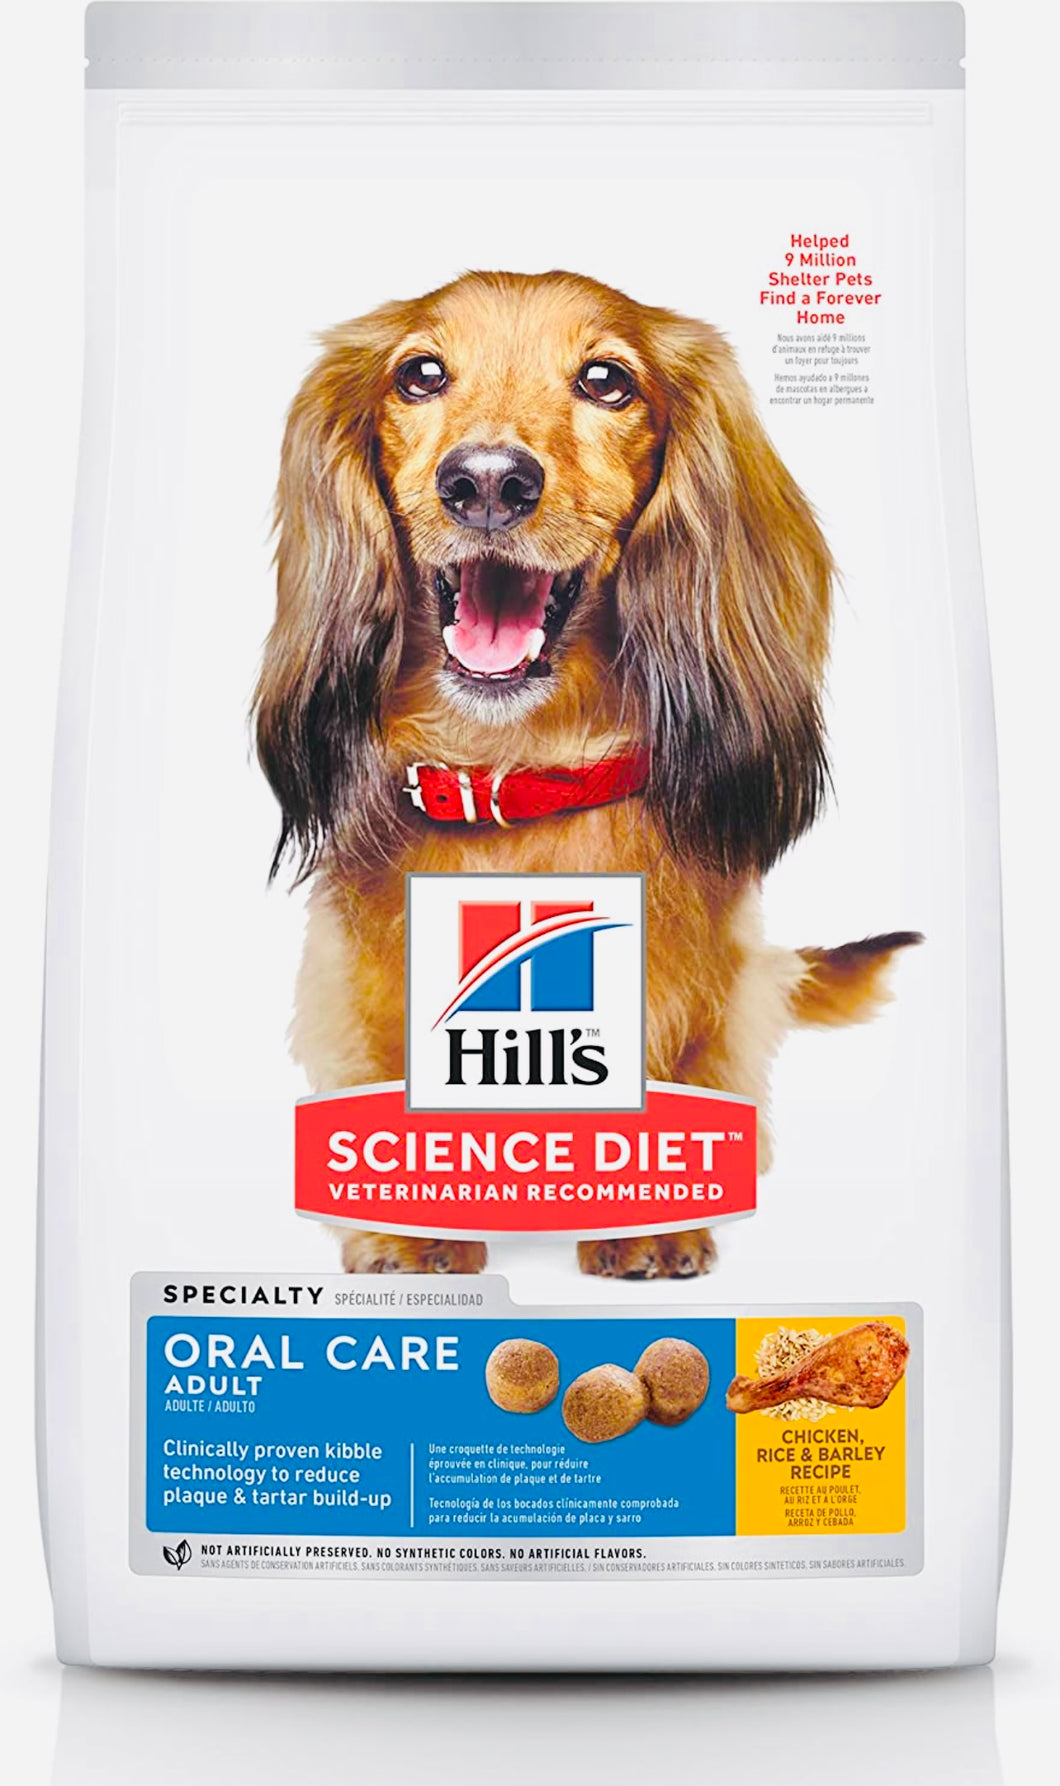 Hill’s science diet chicken rice and barley recipe oral care adult 12KG